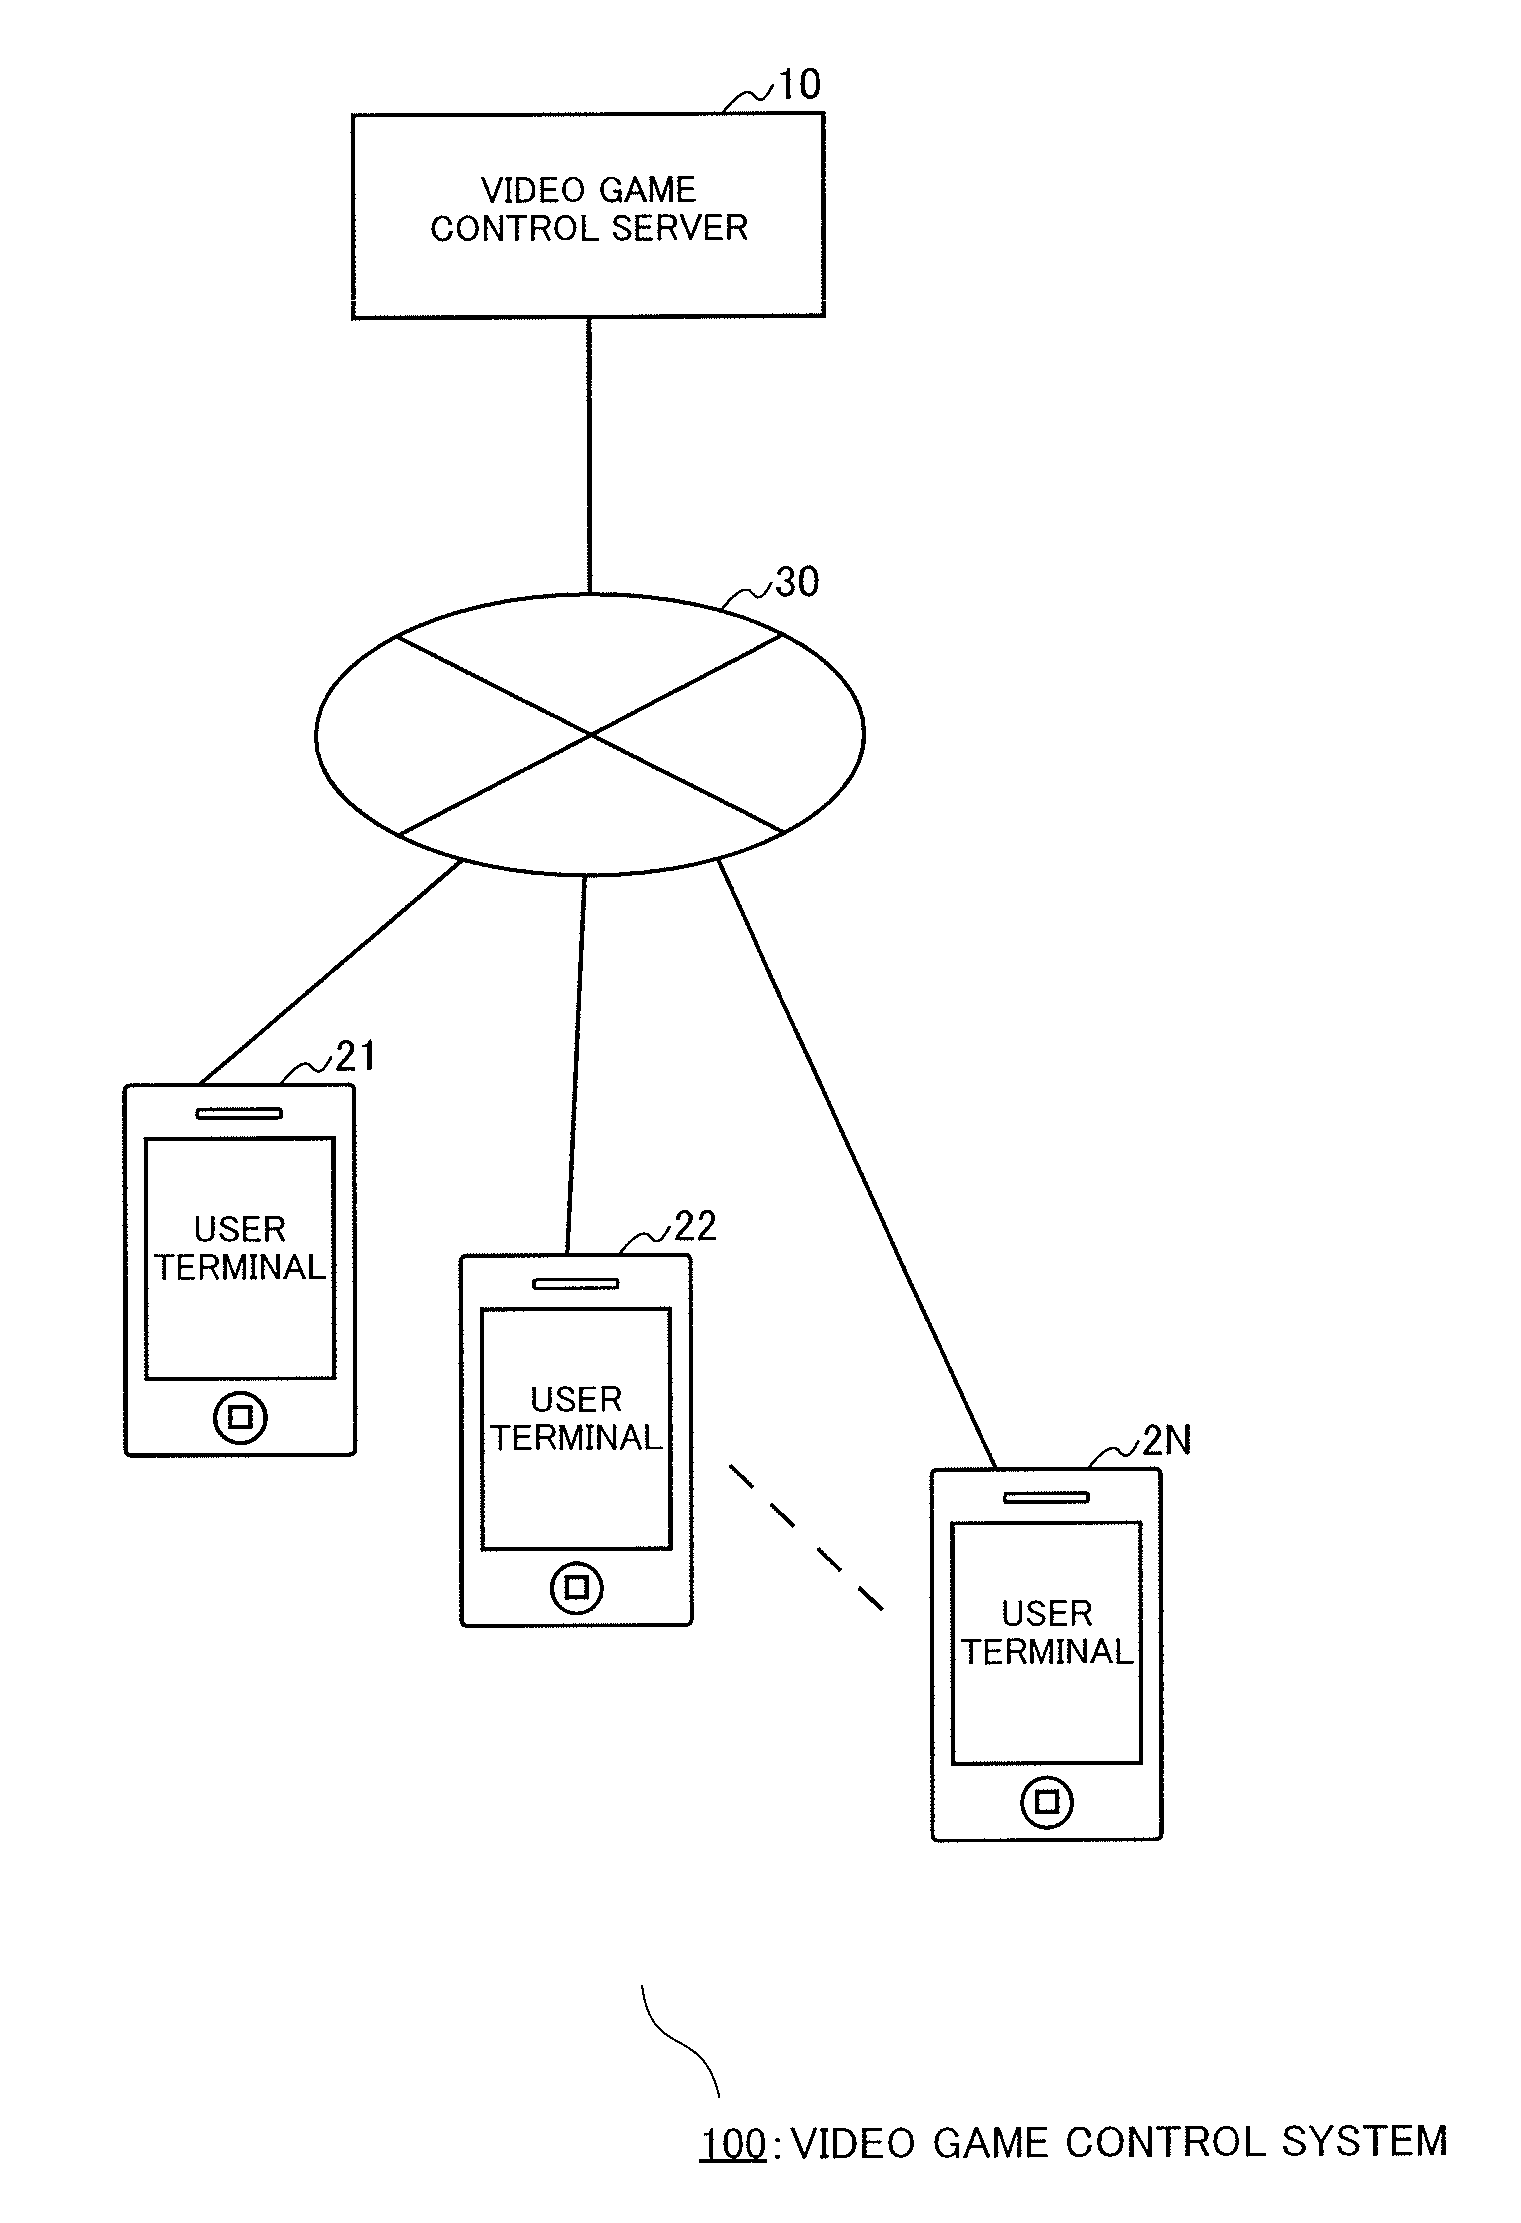 Video game control server, video game control apparatus, and video game control program product